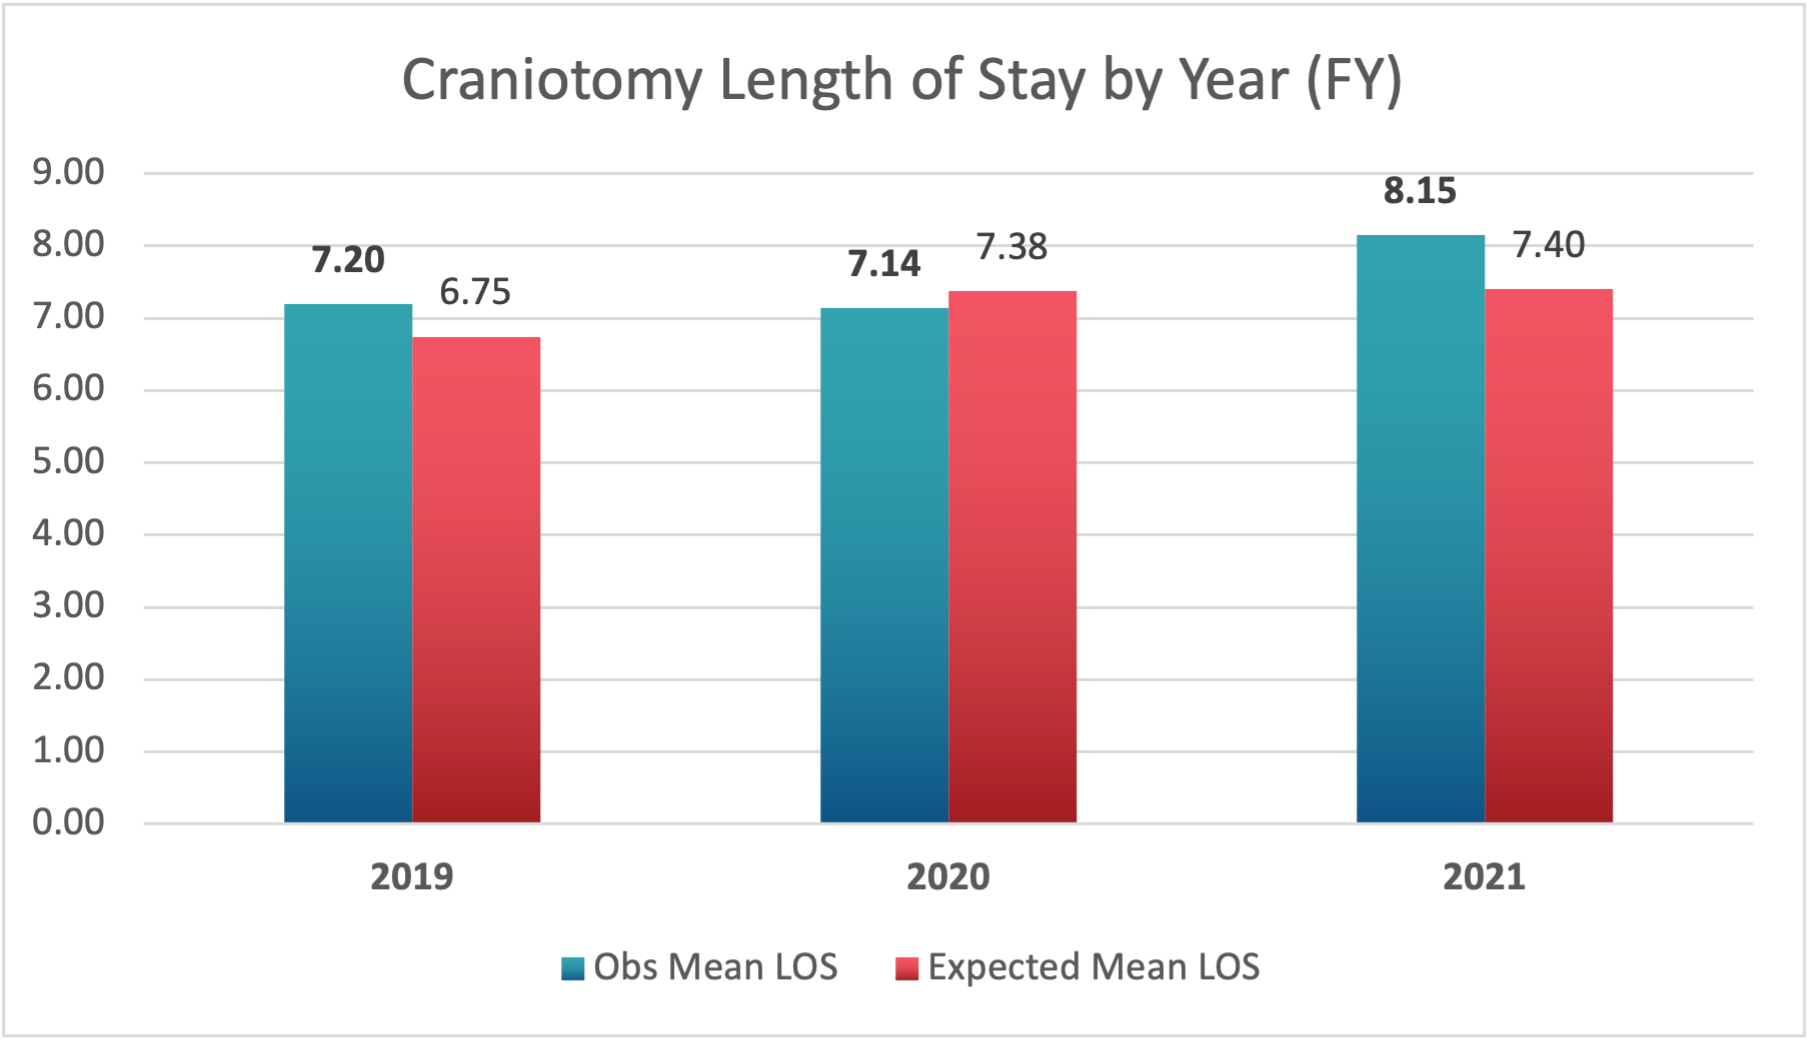 Craniotomy Length of Stay by Year